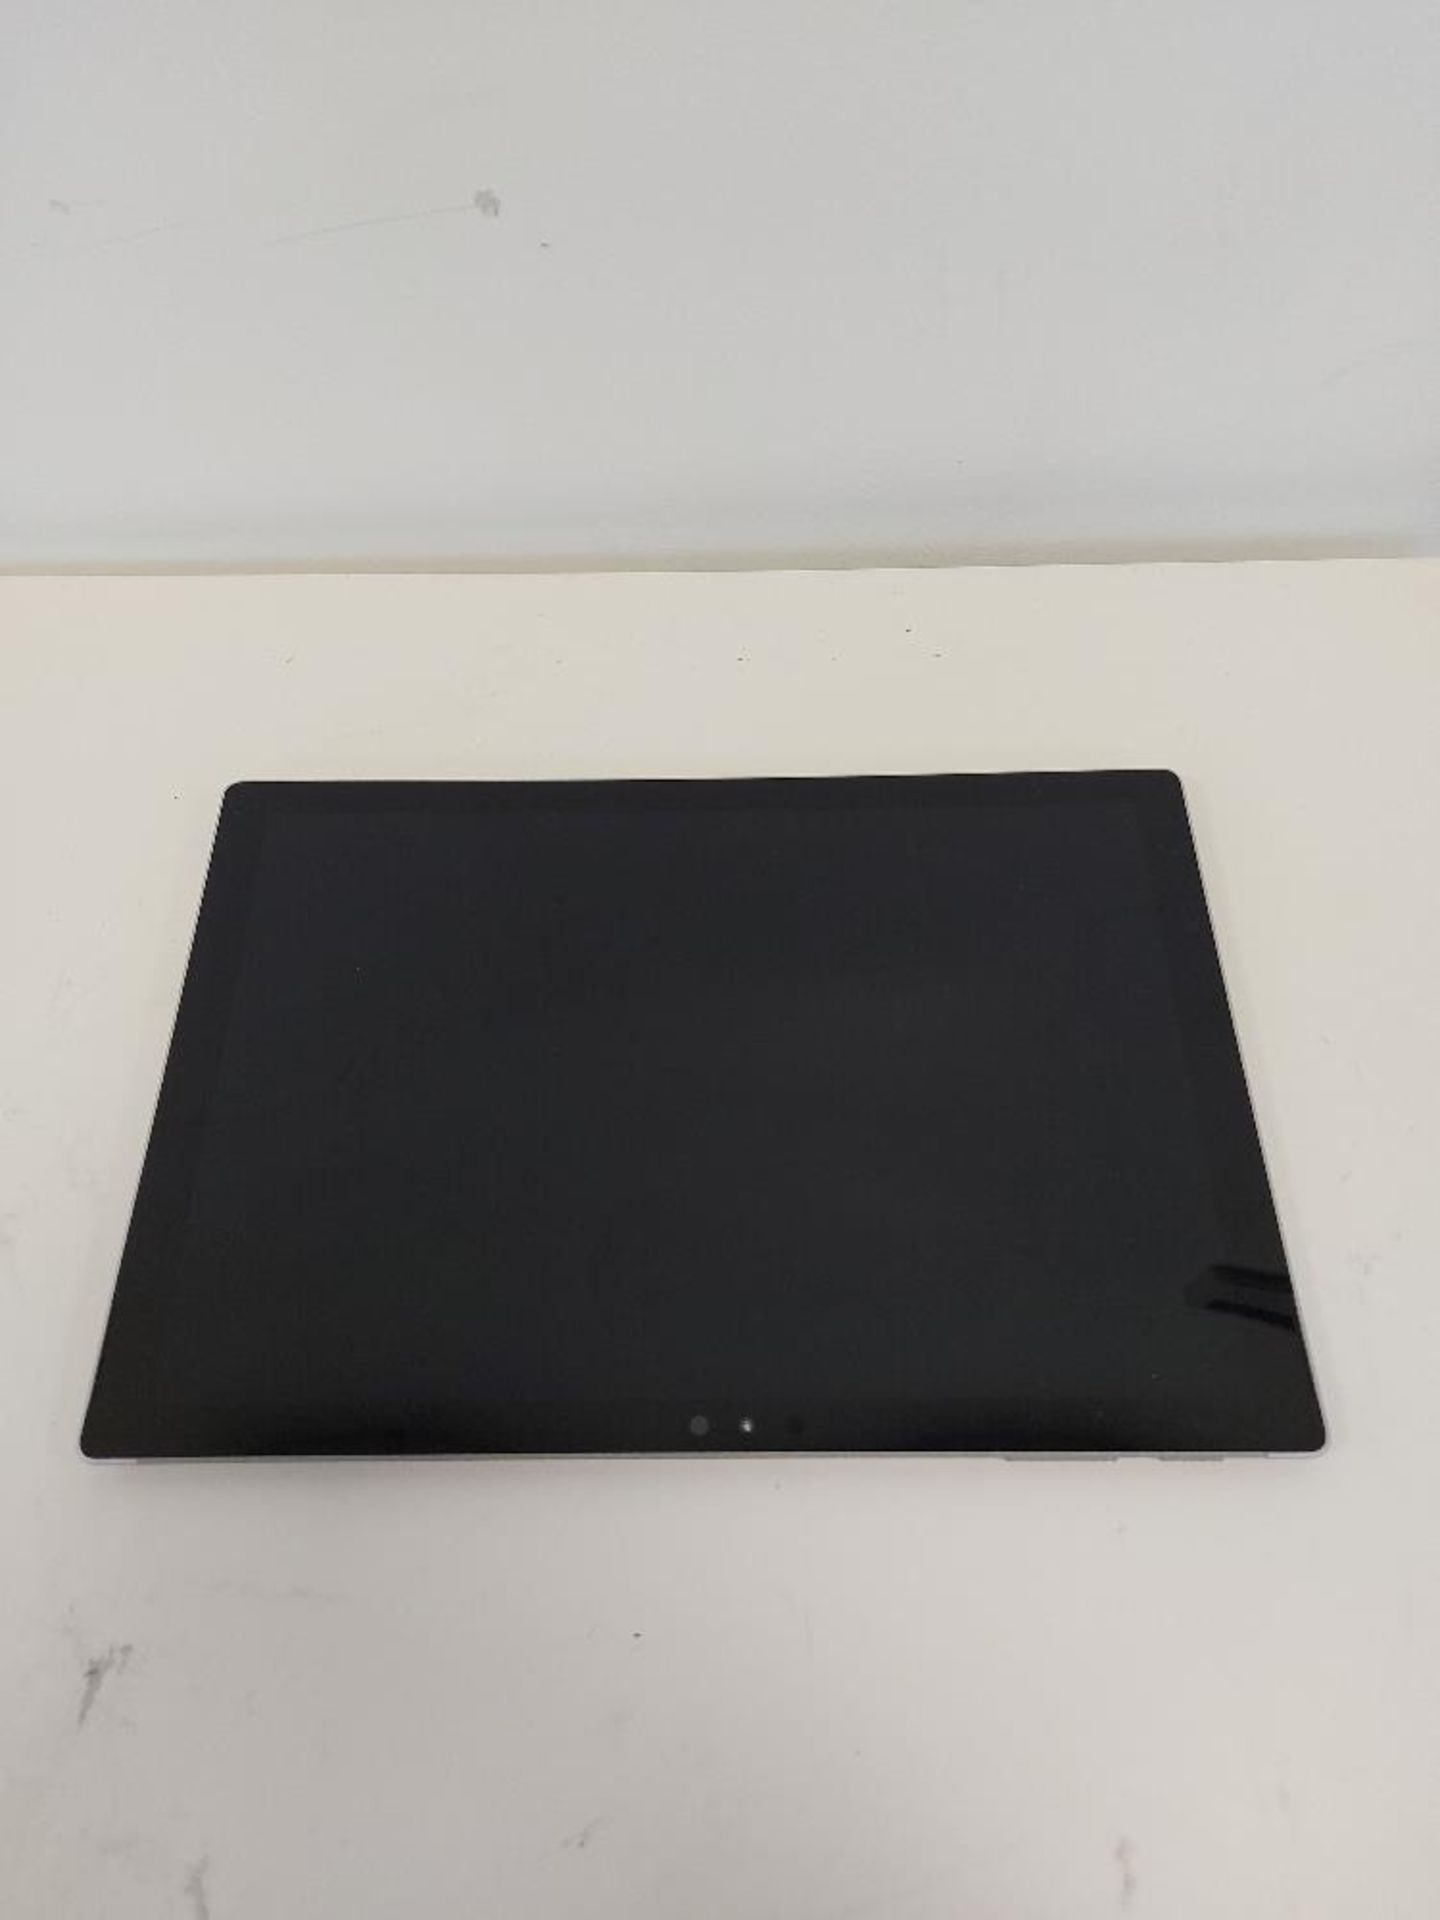 Microsoft Surface Pro 4 128GB Tablet